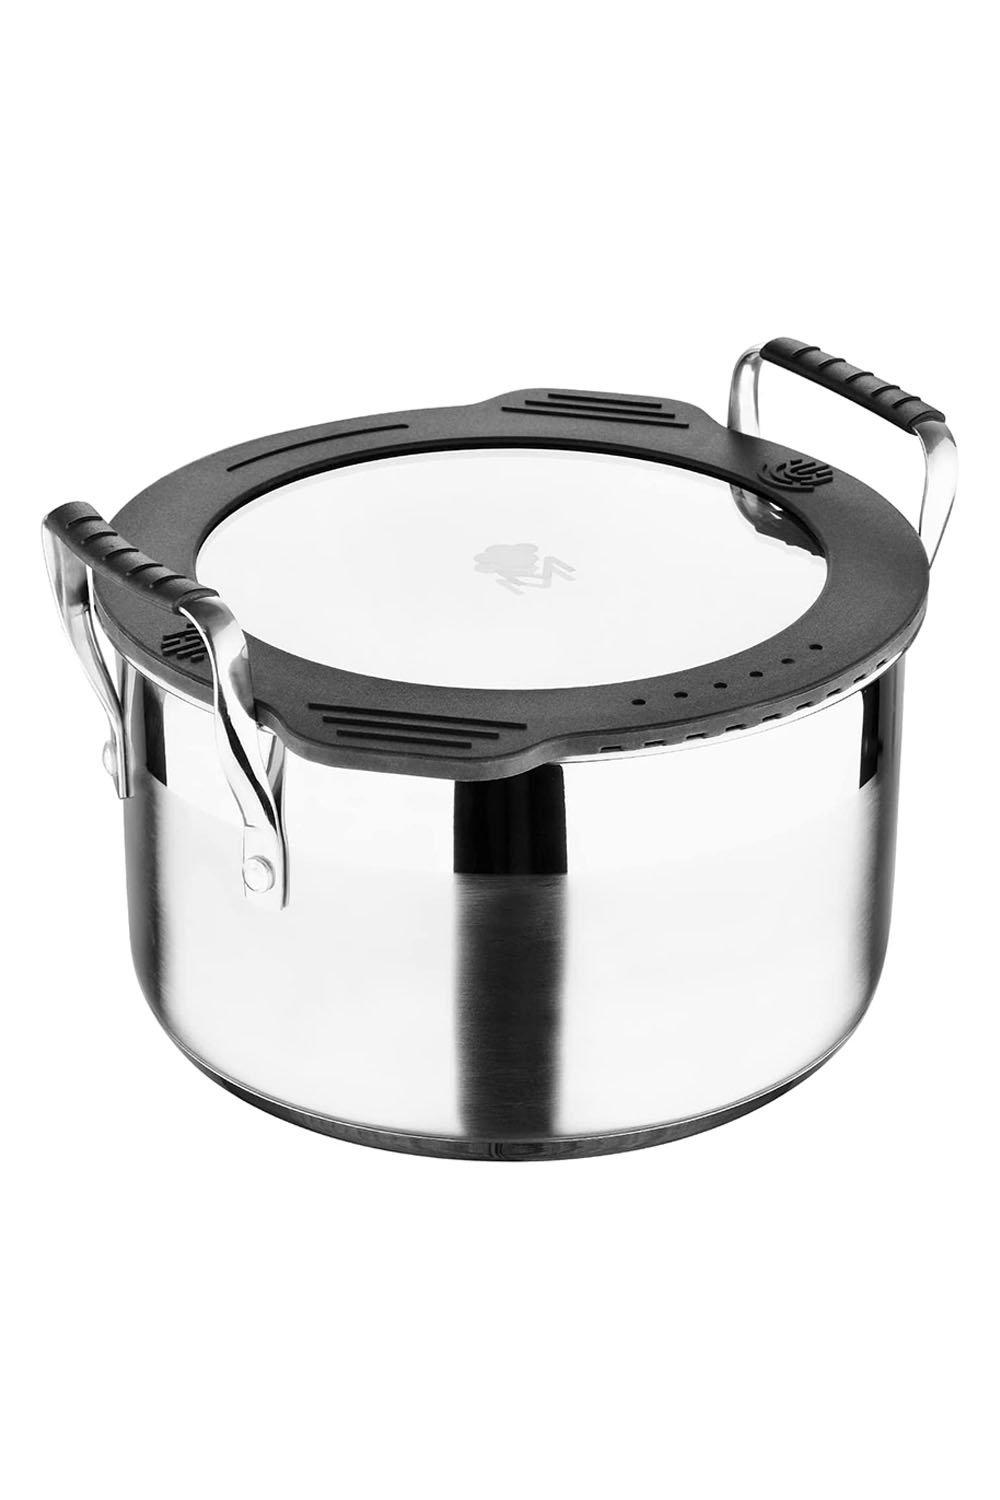 Smart Stackable Stainless Steel Casserole with Tempered Glass Flat Lid 24cm Silver